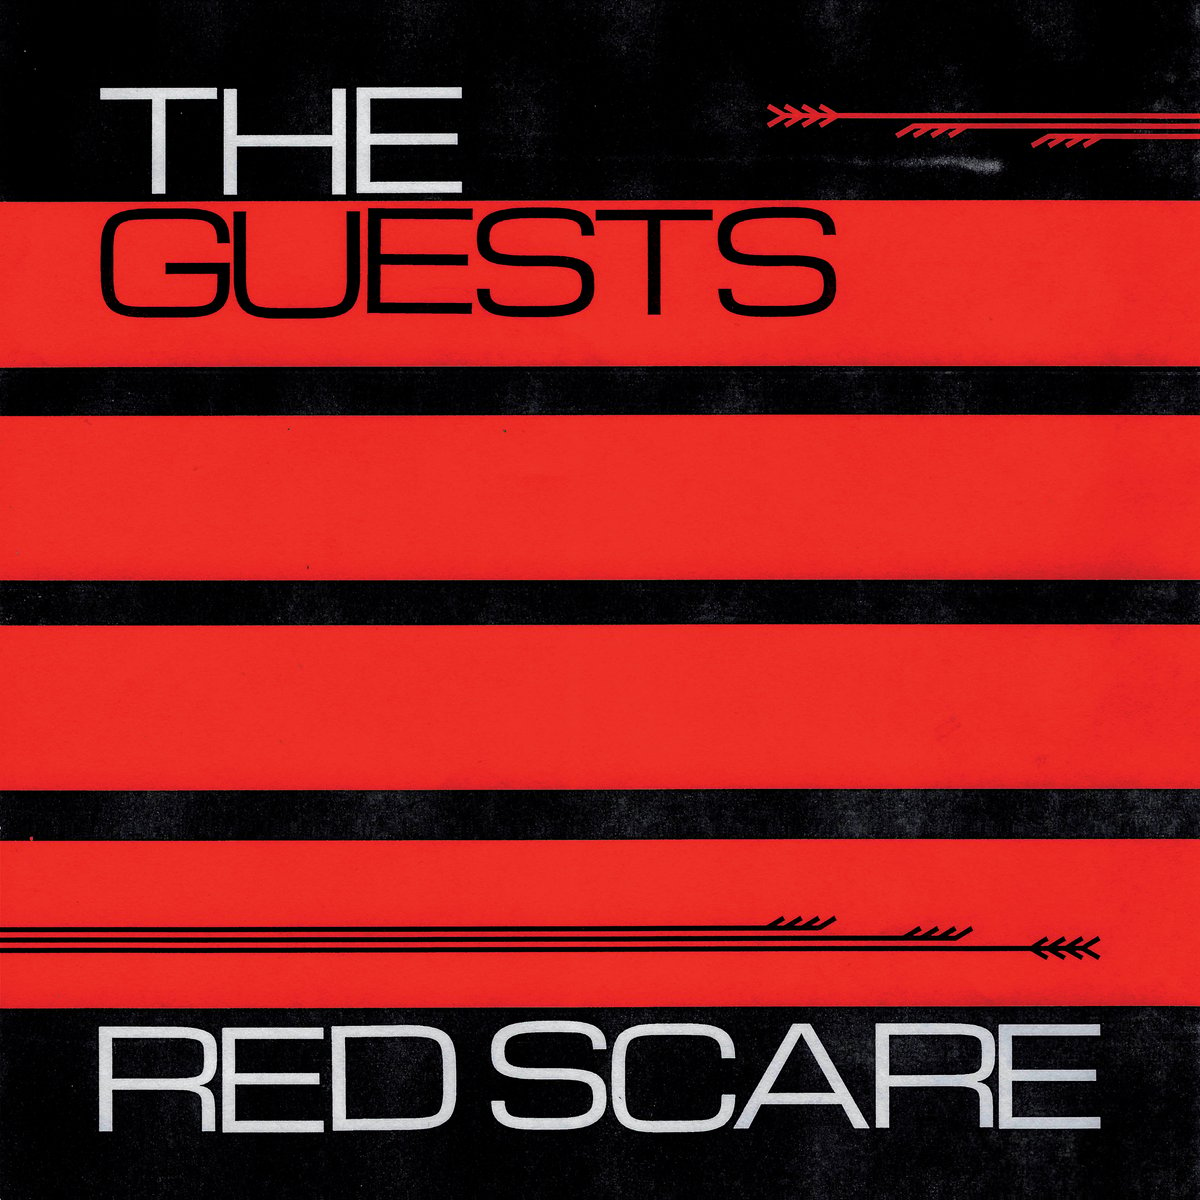 Red scare. Альбом ред. Red Scare группа. Guest.